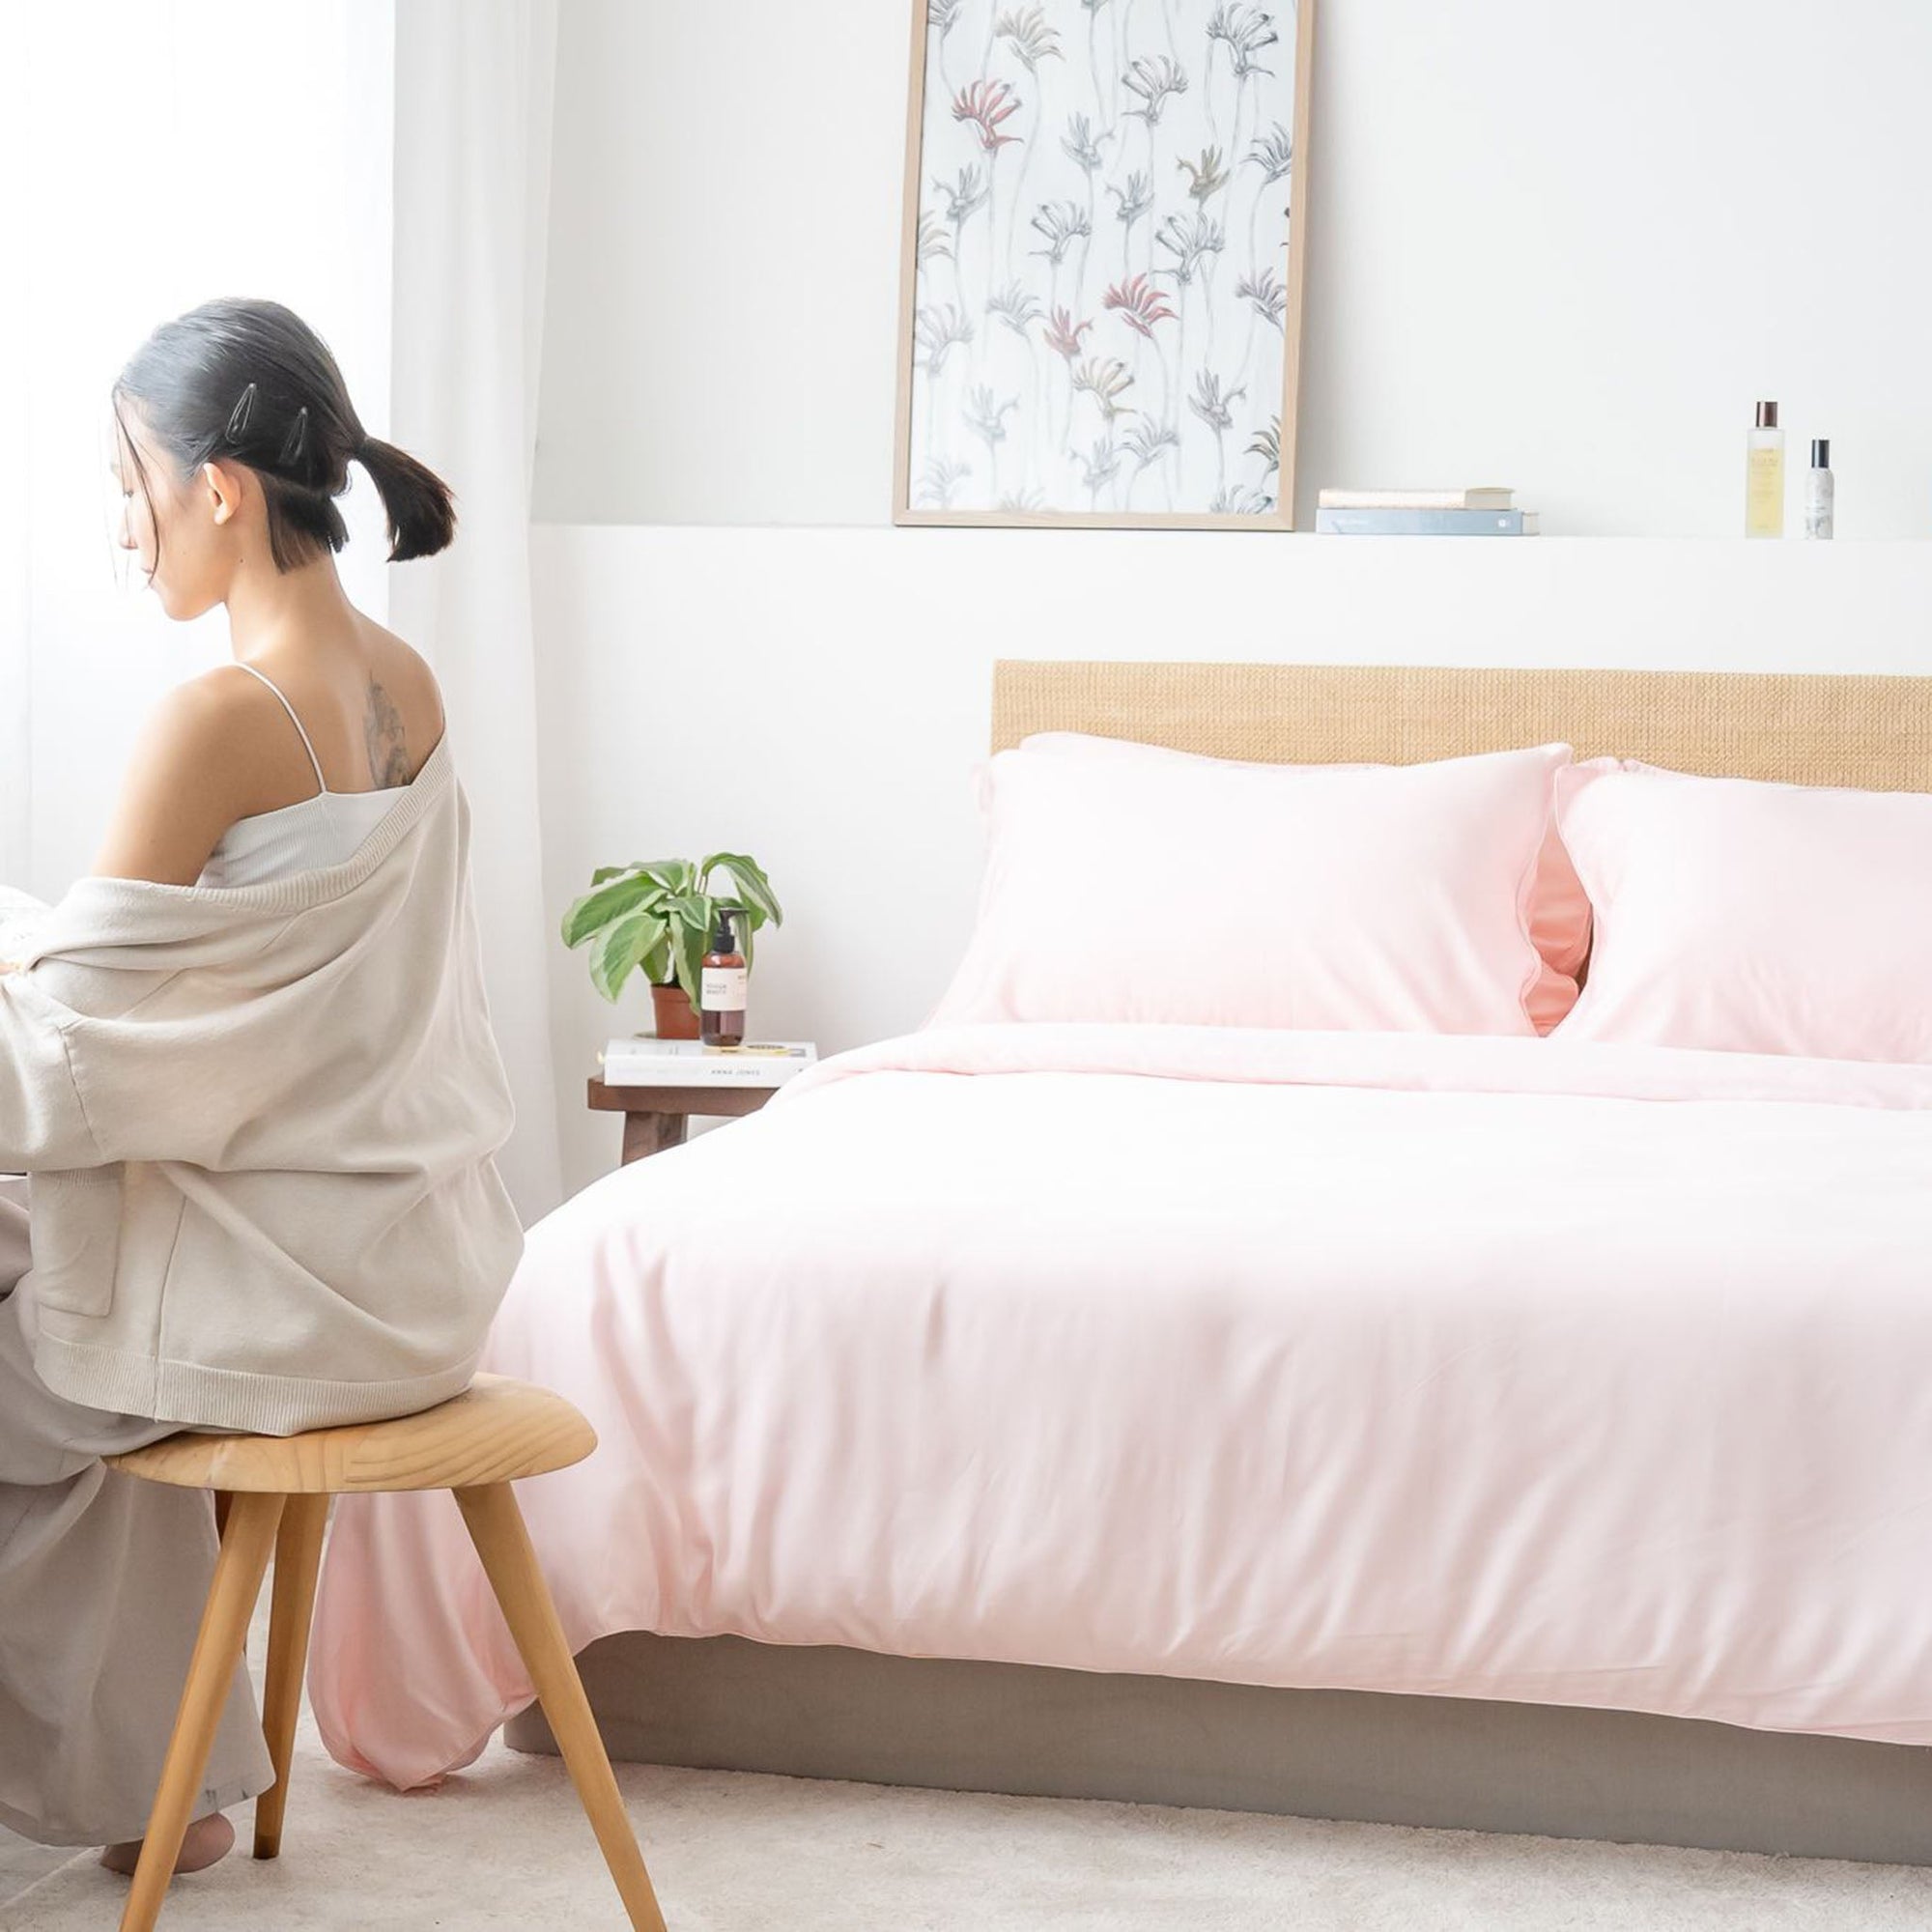 Blush Pink TENCEL Bed Sheets Fitted Sheet Set with Tencel fitted sheet, Tencel Pillow Case, Tencel Duvet Cover. Buy Blush Pink Tencel Fitted bed sheet set at Weavve Home, Best Bed Sheets Singapore and Luxury Hotel Sheets. 400 High Thread Count Bed Sheet. 